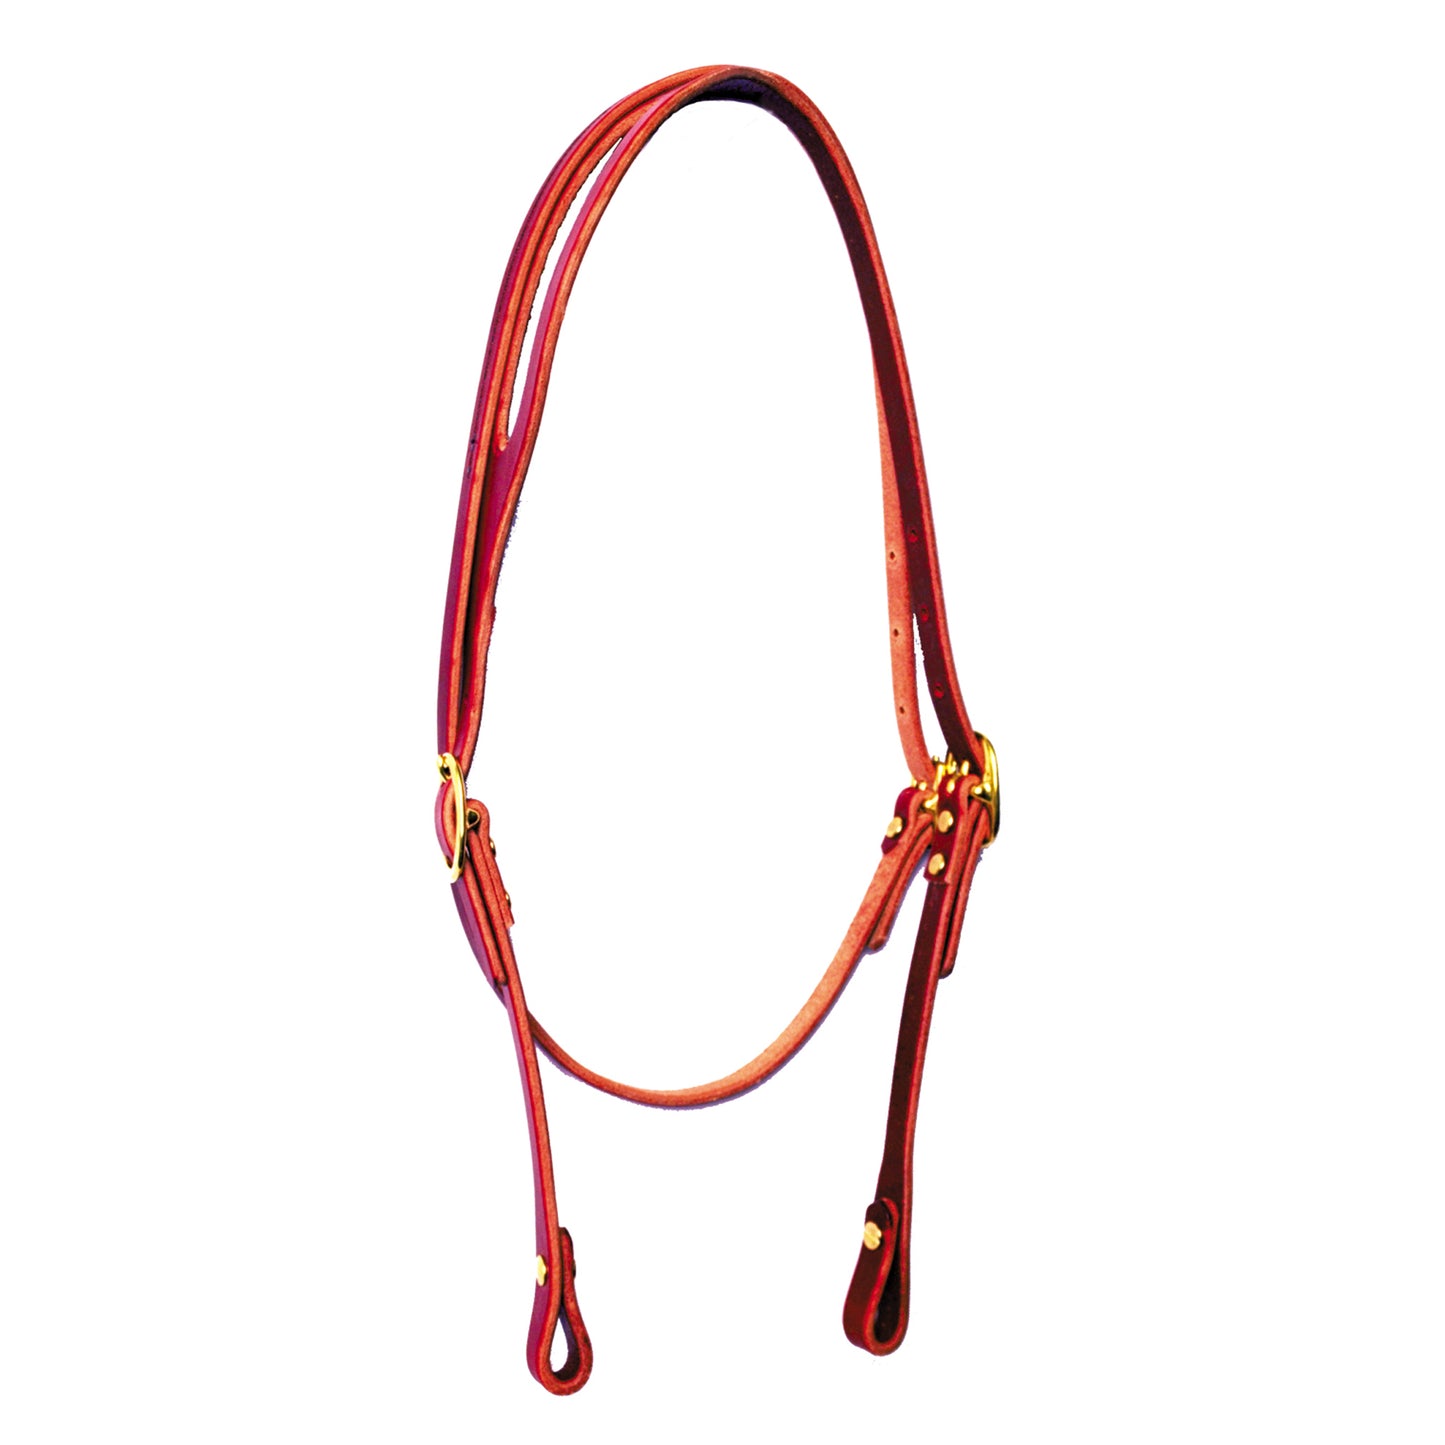 Throat Latch Shaped-Ear Bridle Leather Headstall